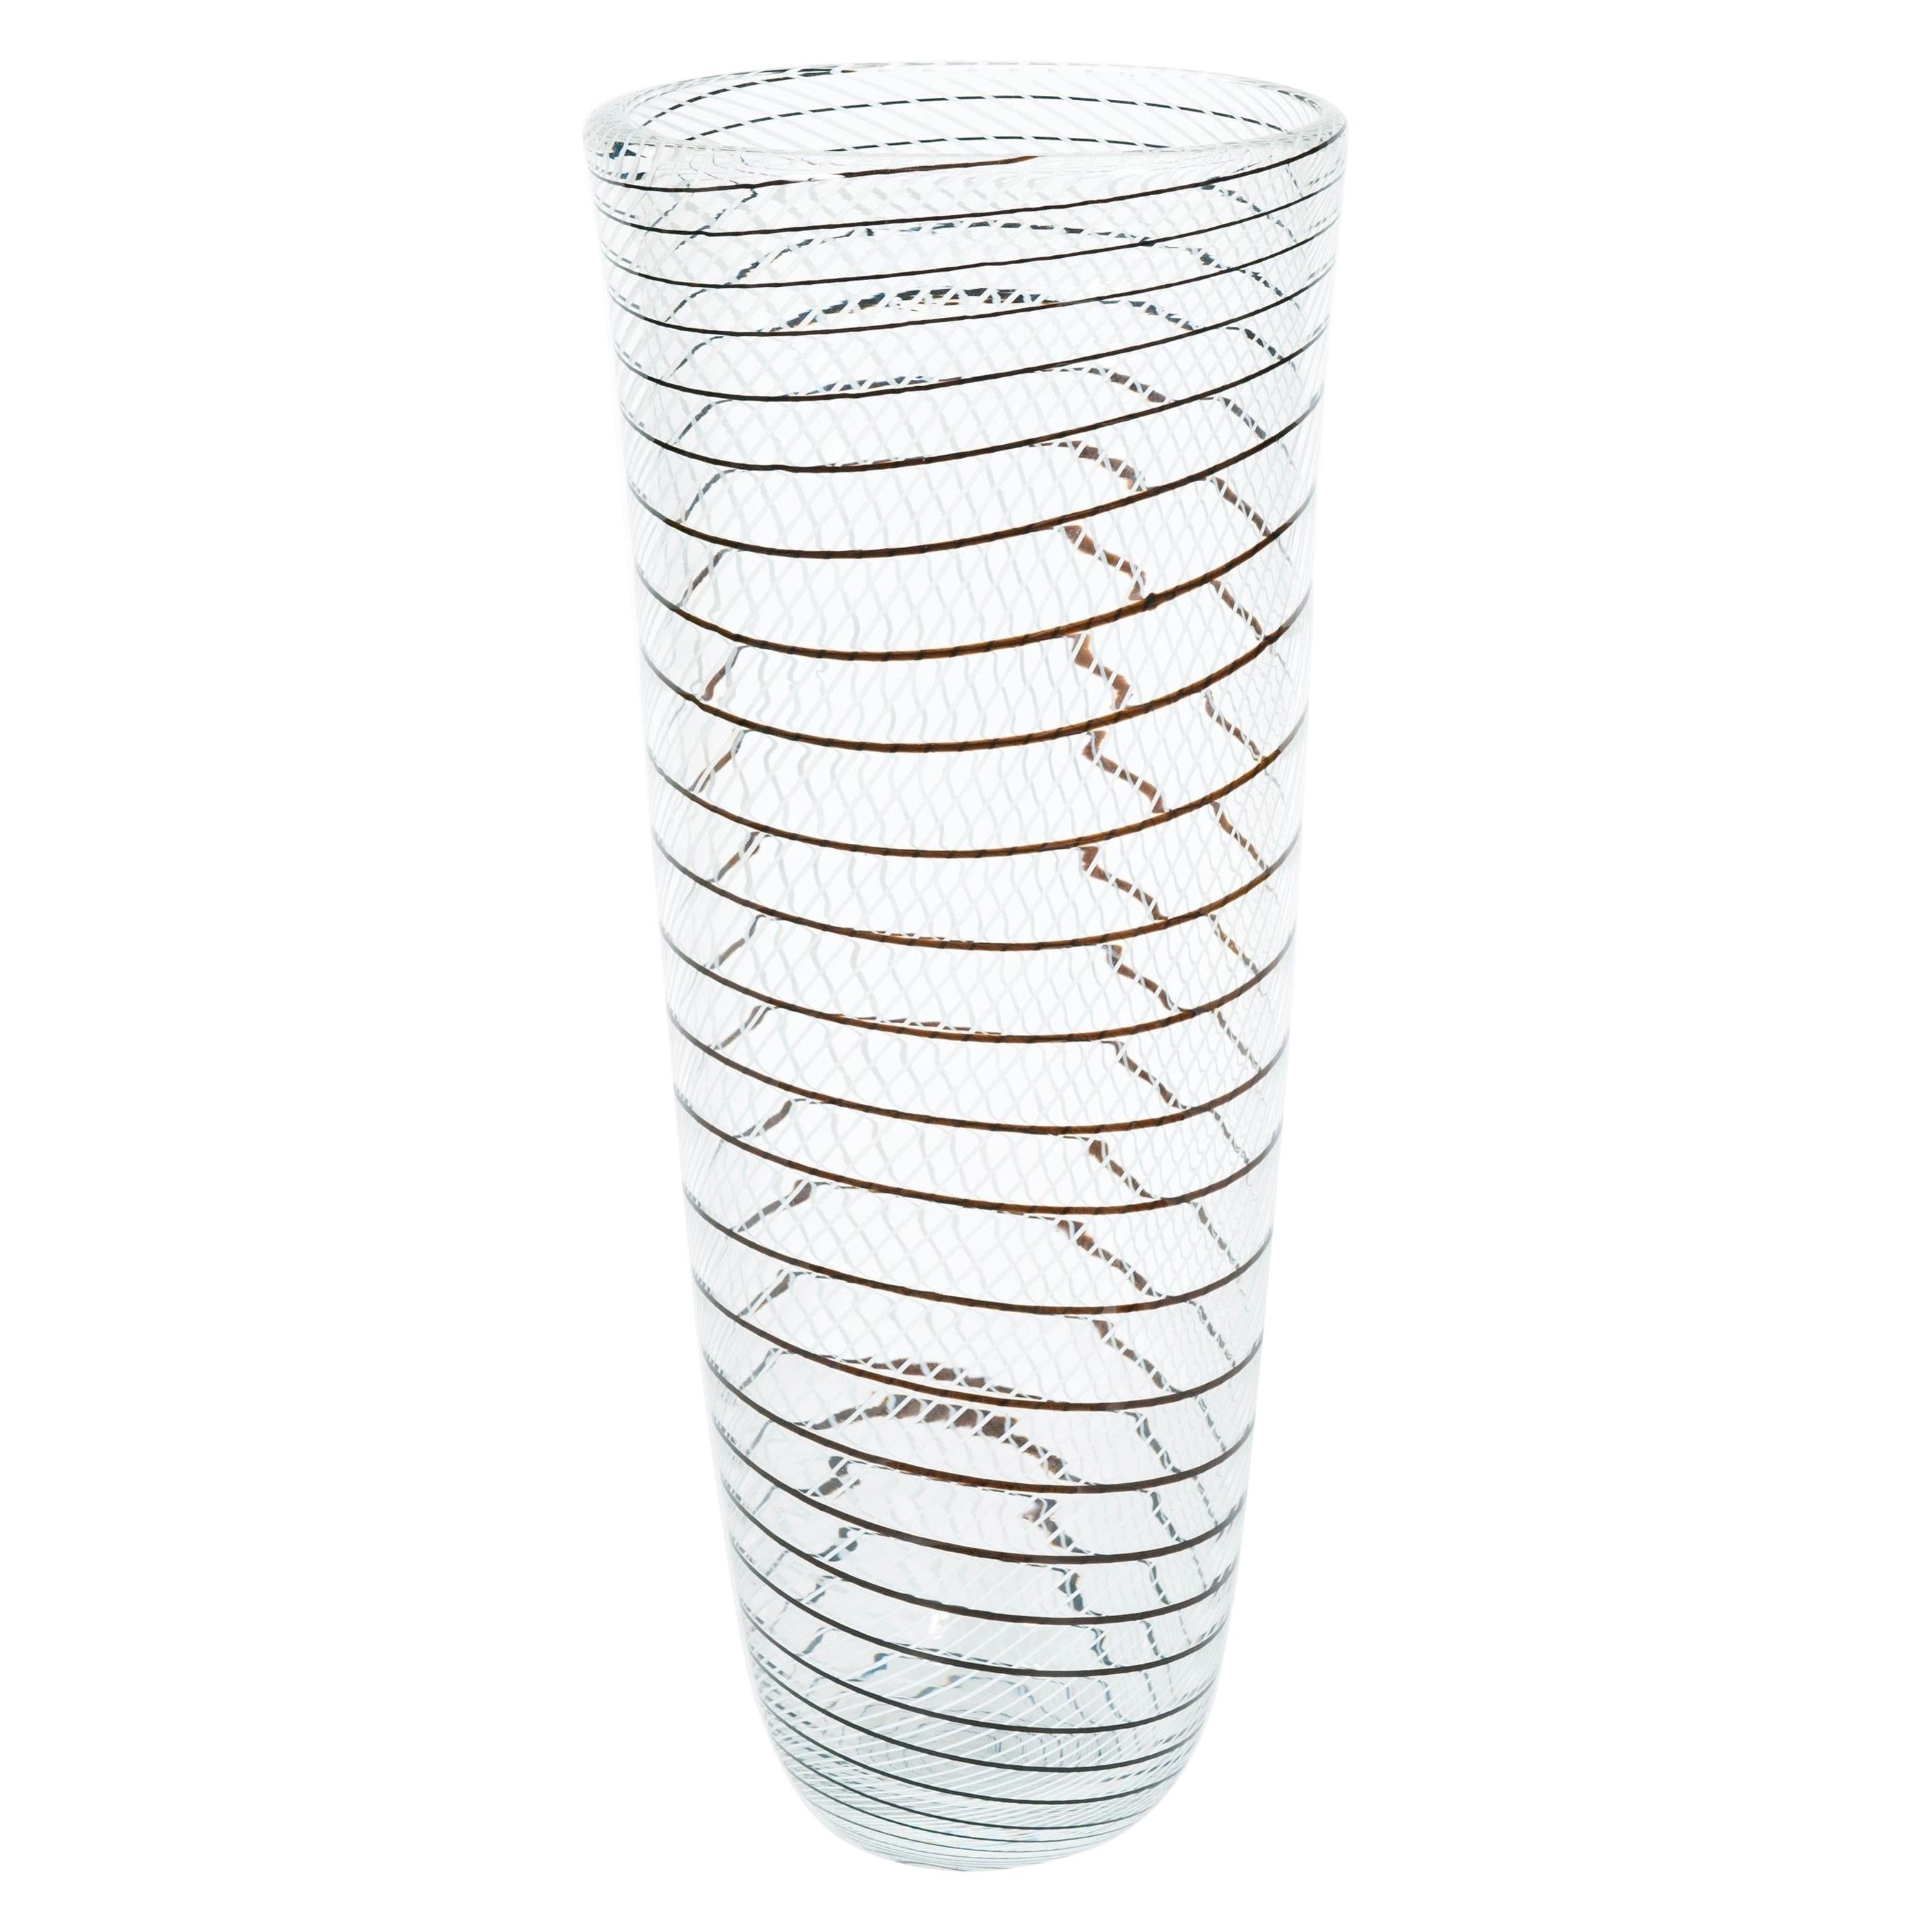 Transparent Murano Glass Artistic Vase with Black and White Patterns, 1990s For Sale